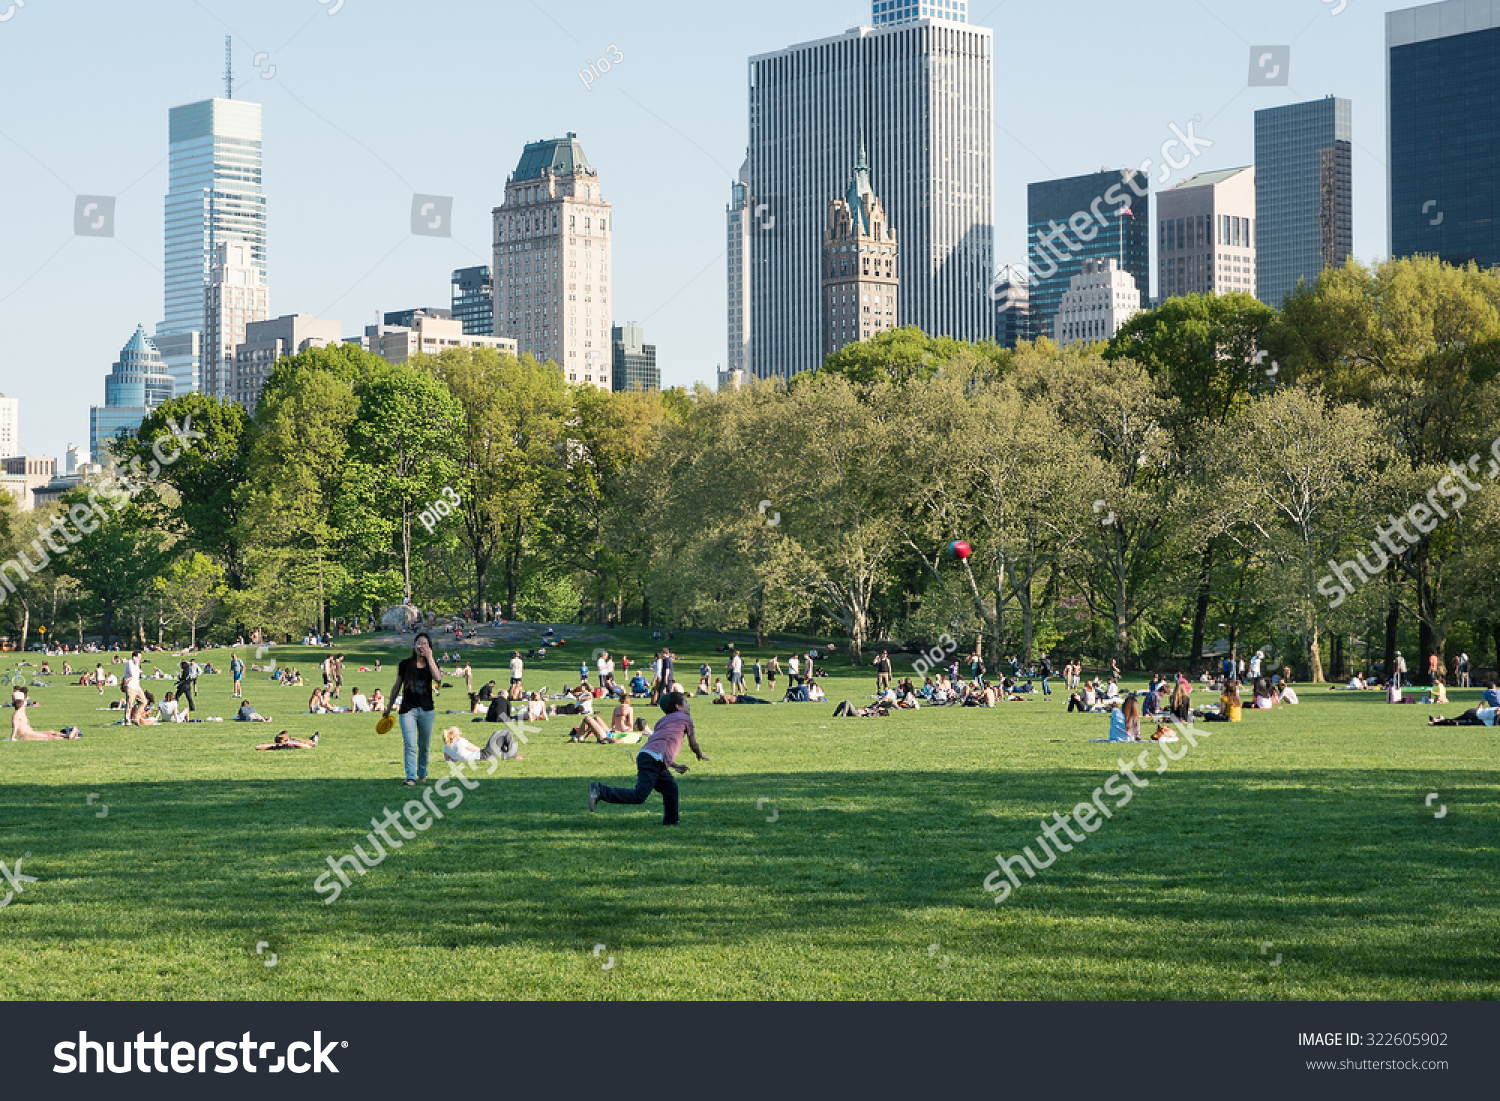 New York City - May 7, 2015: People Enjoying Outdoors Activities In ...